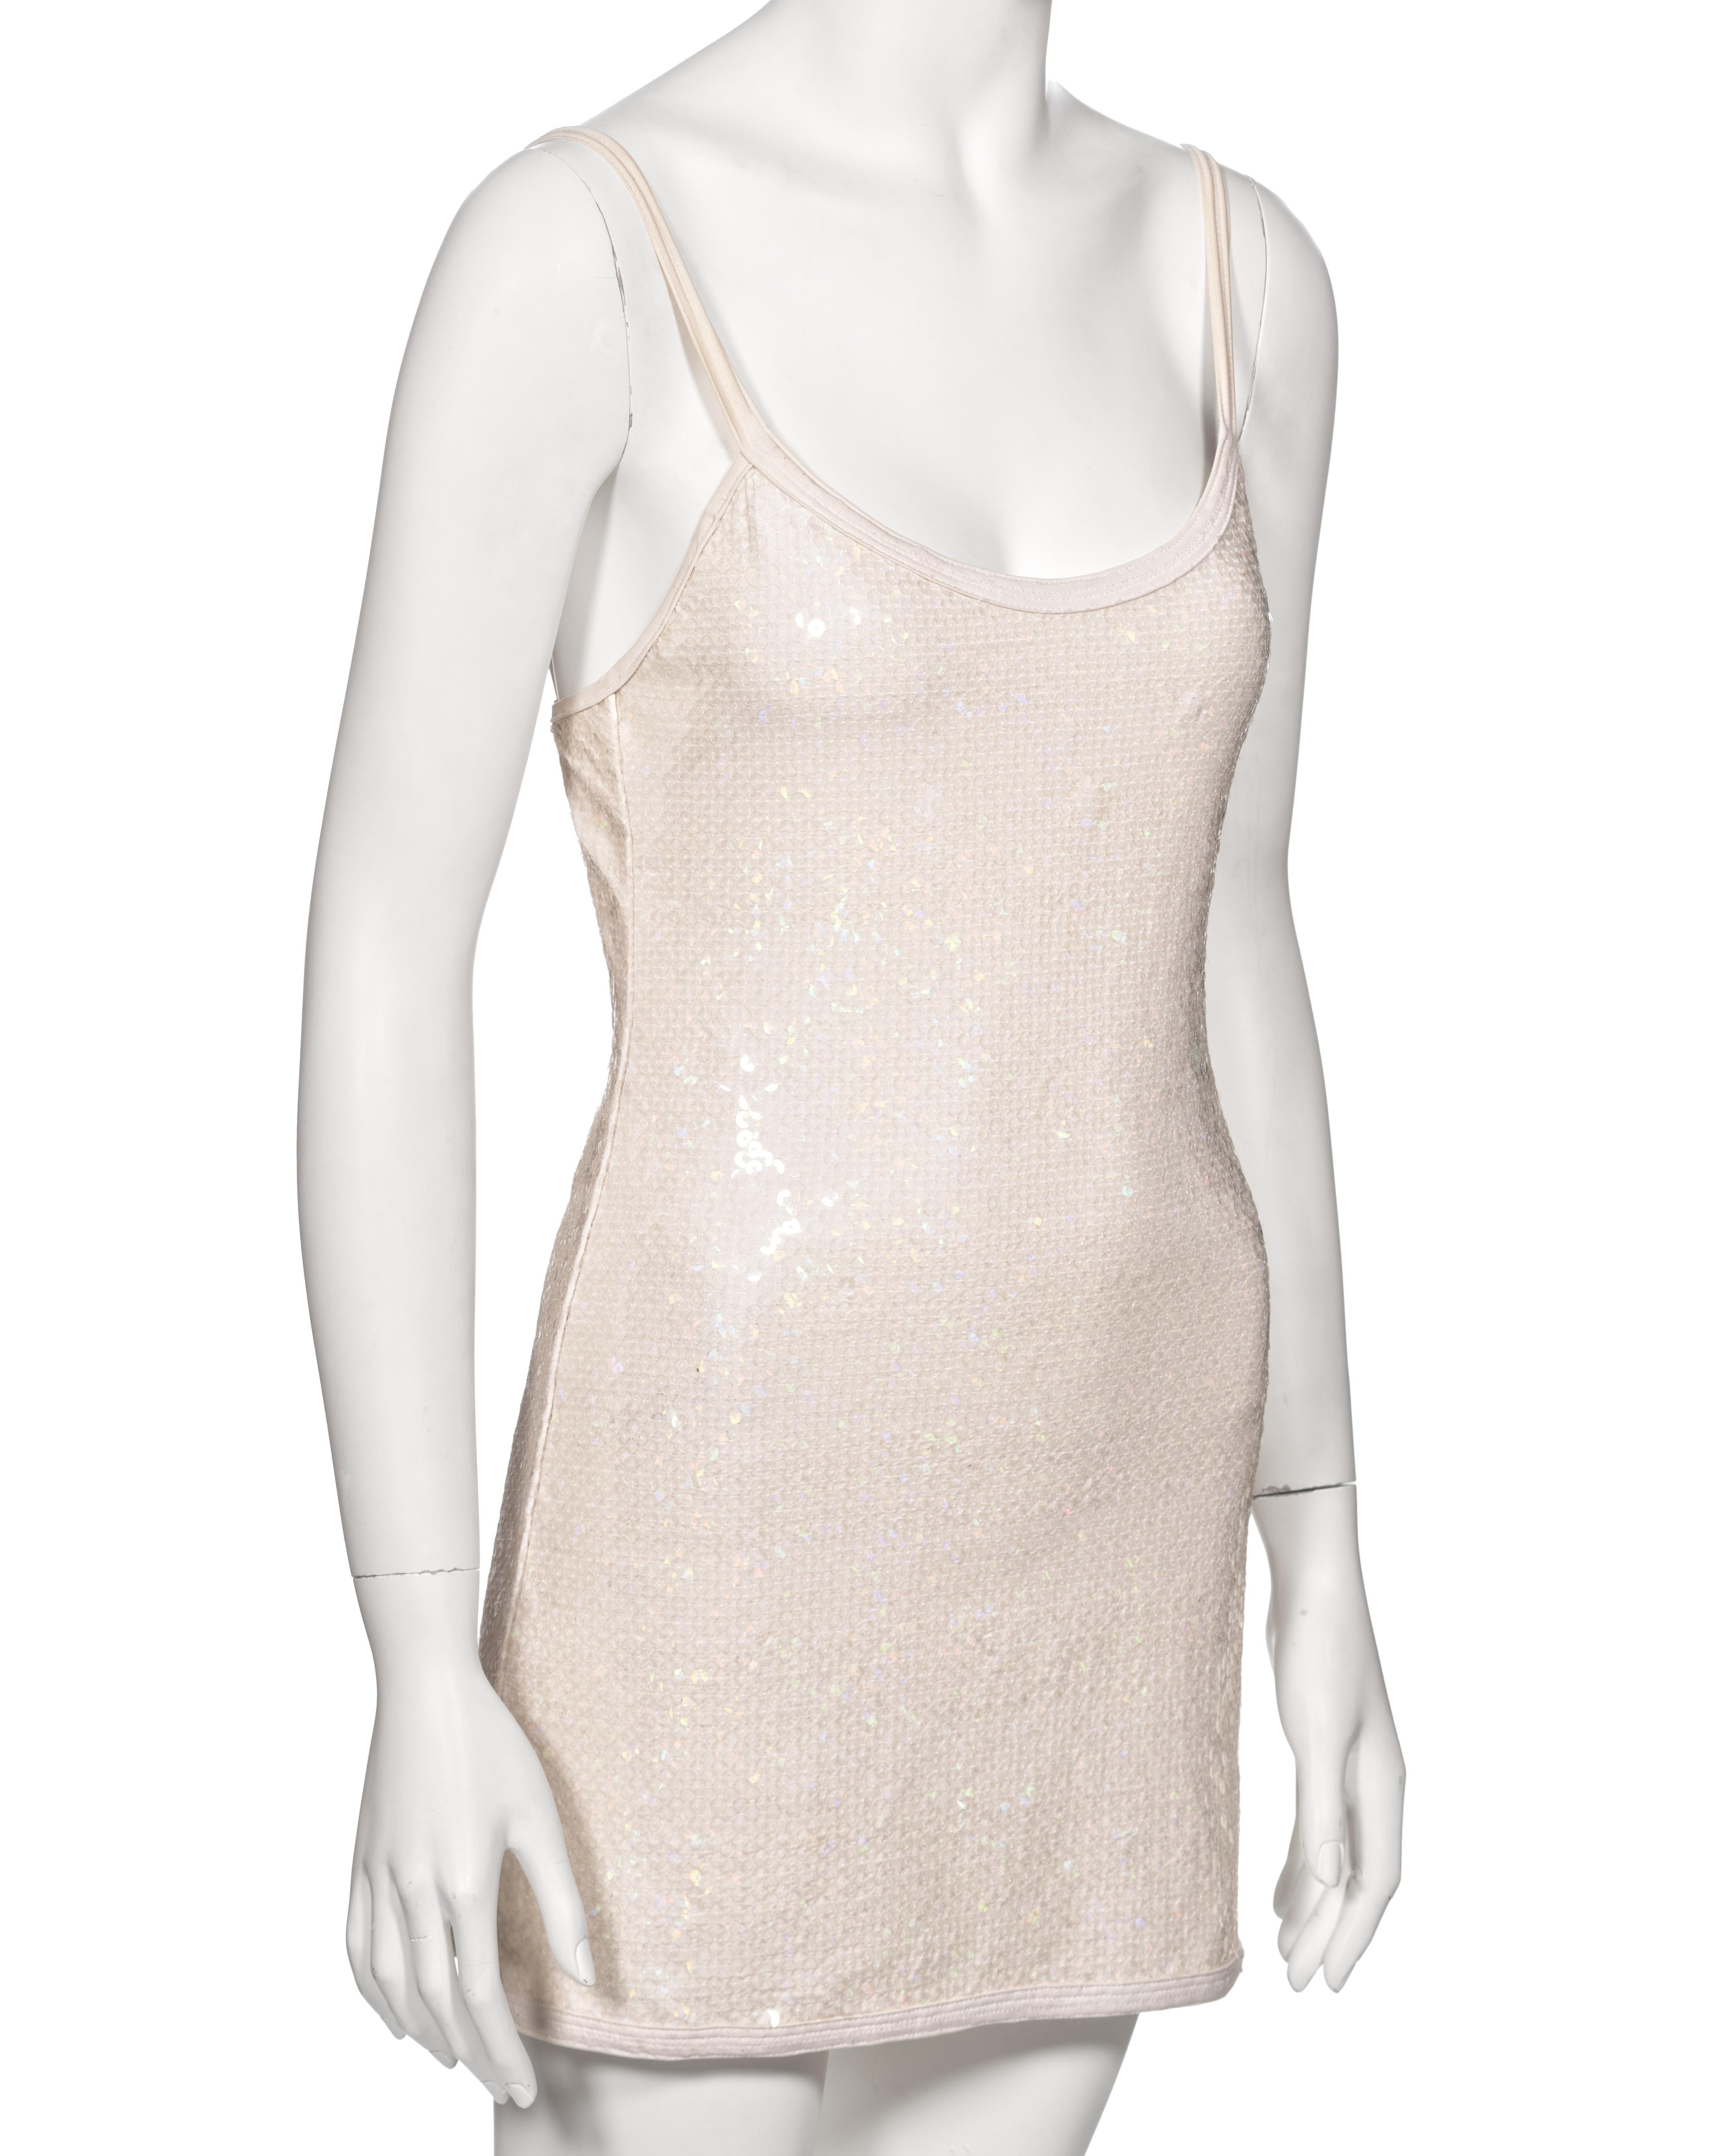 Chanel by Karl Lagerfeld White Iridescent Sequin Mini Dress, ss 2005 For Sale 2